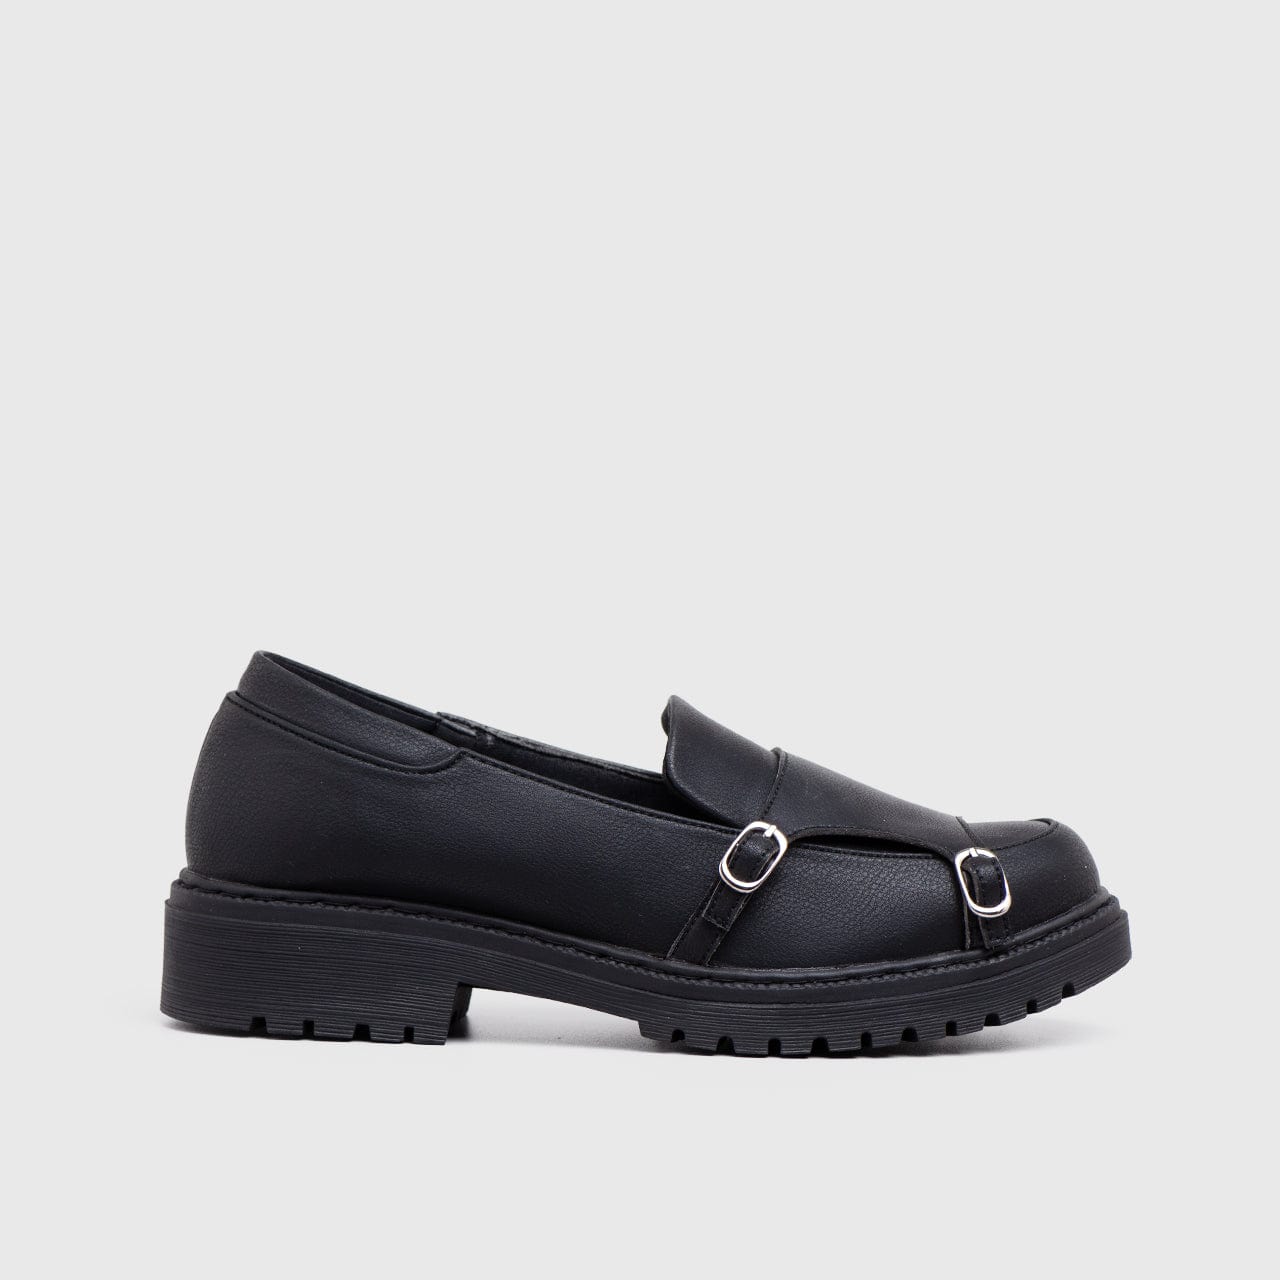 Adorable Projects Official Adorableprojects - Gianna Loafer Black